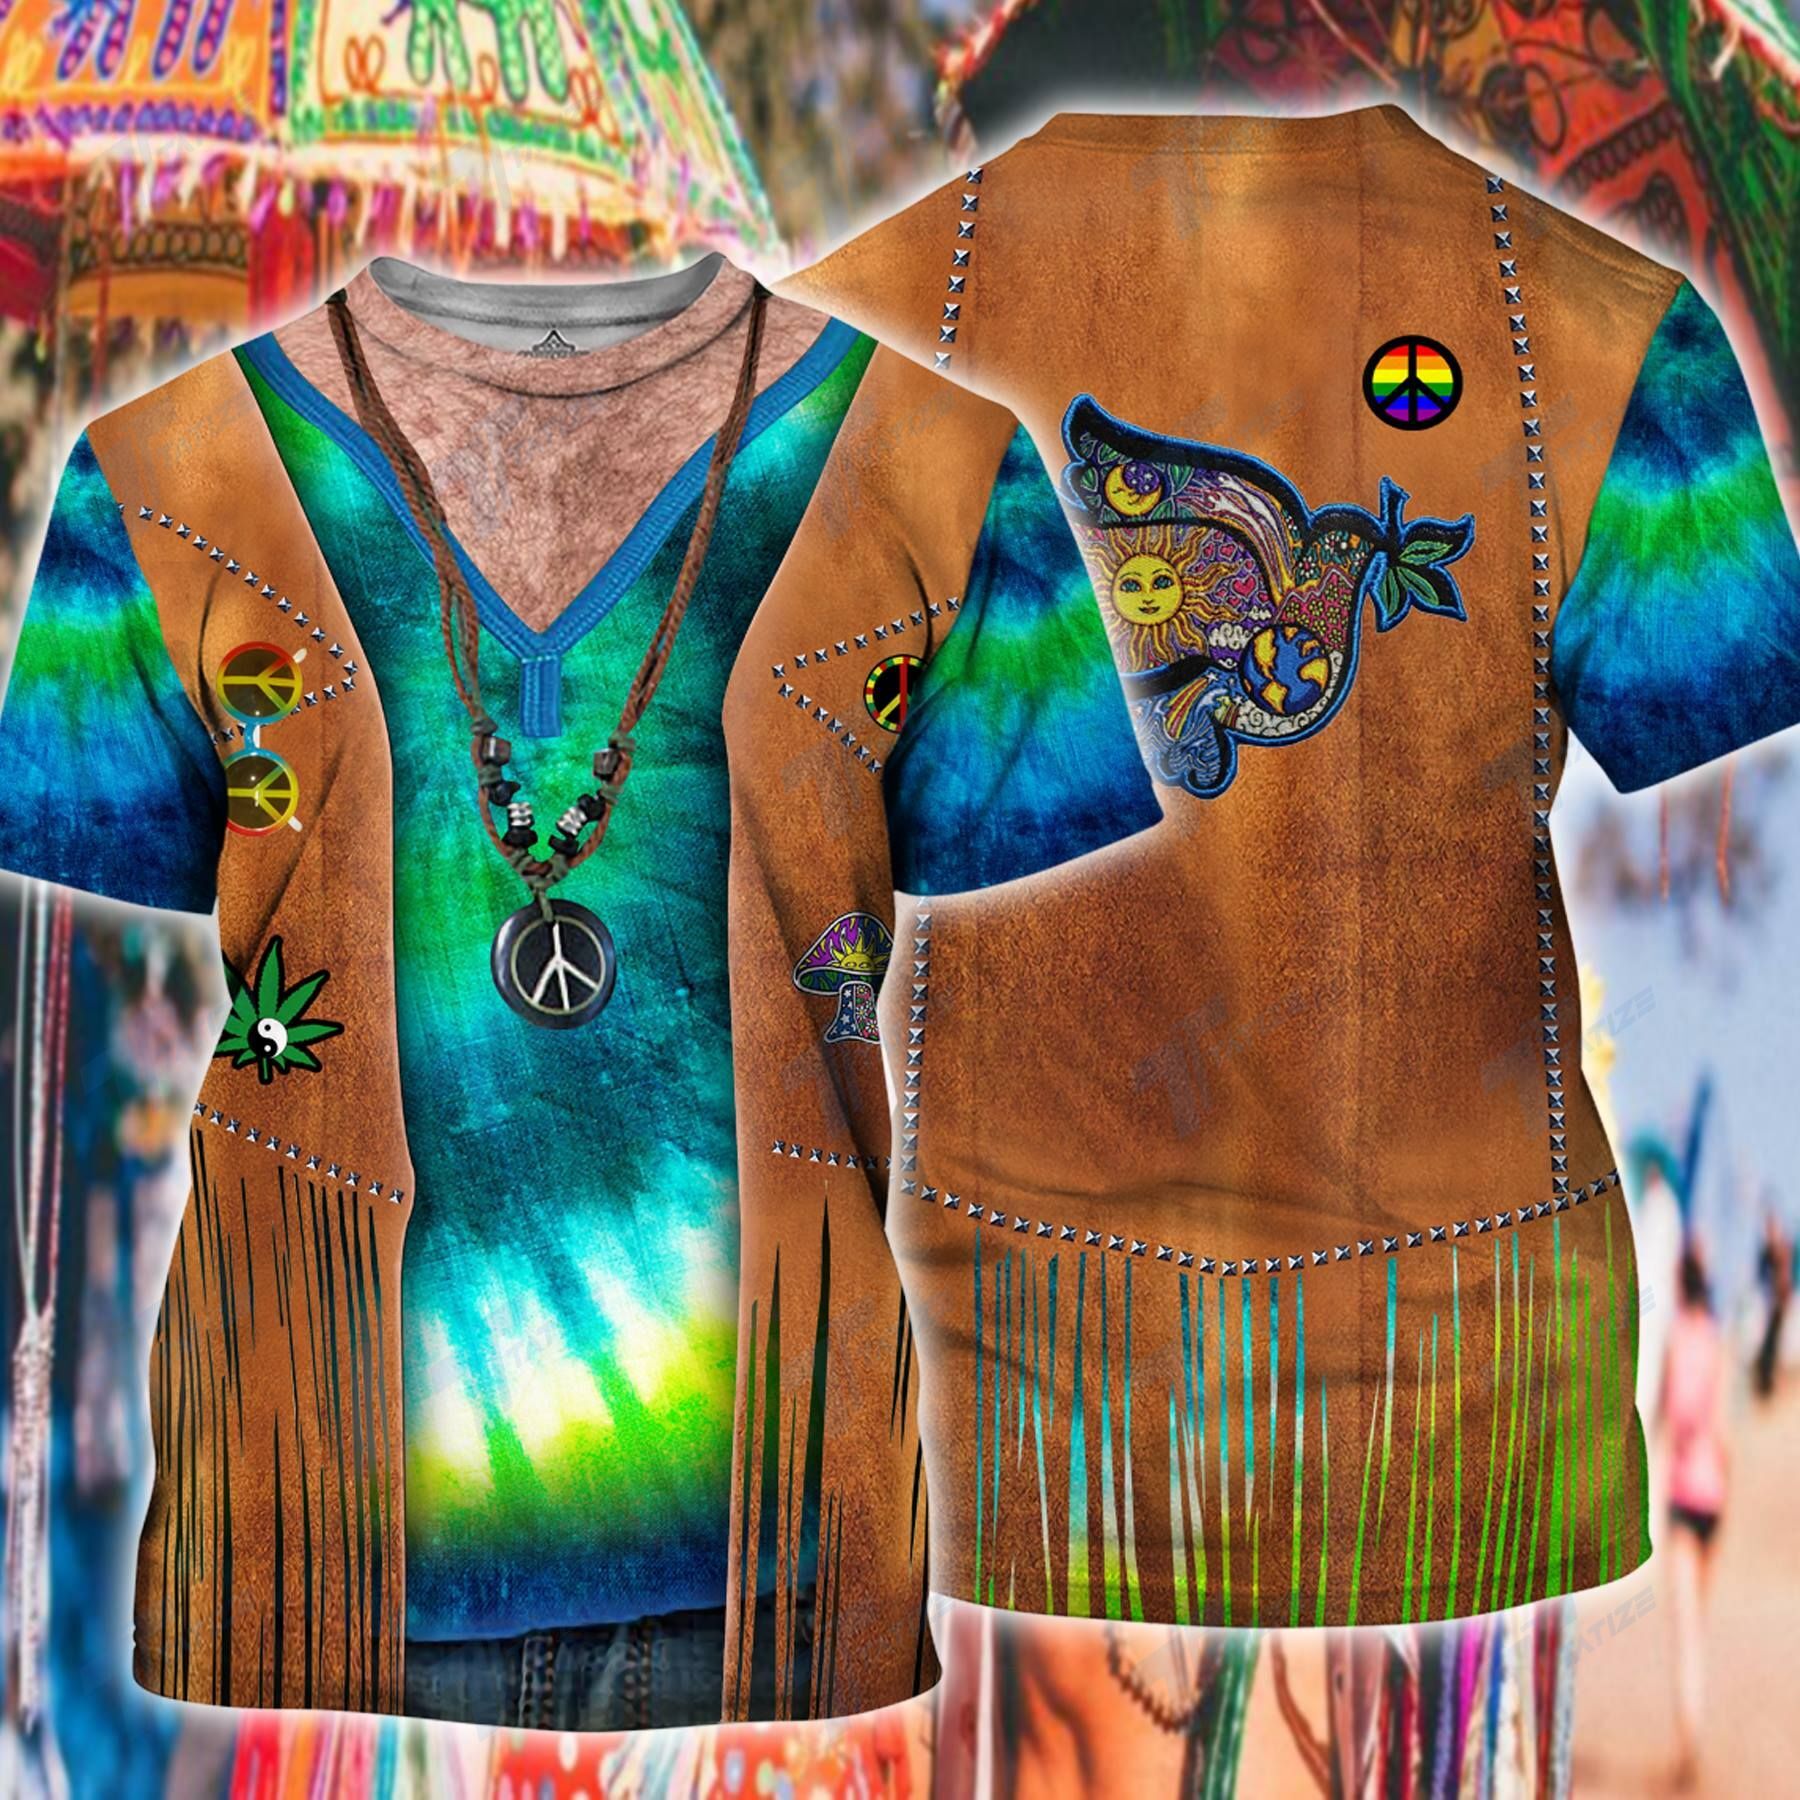  Hippie T-shirt Peace Pigeon Symbol Wearing Hippie Top Costume T-shirt Apparel Adult Full Print Full Size